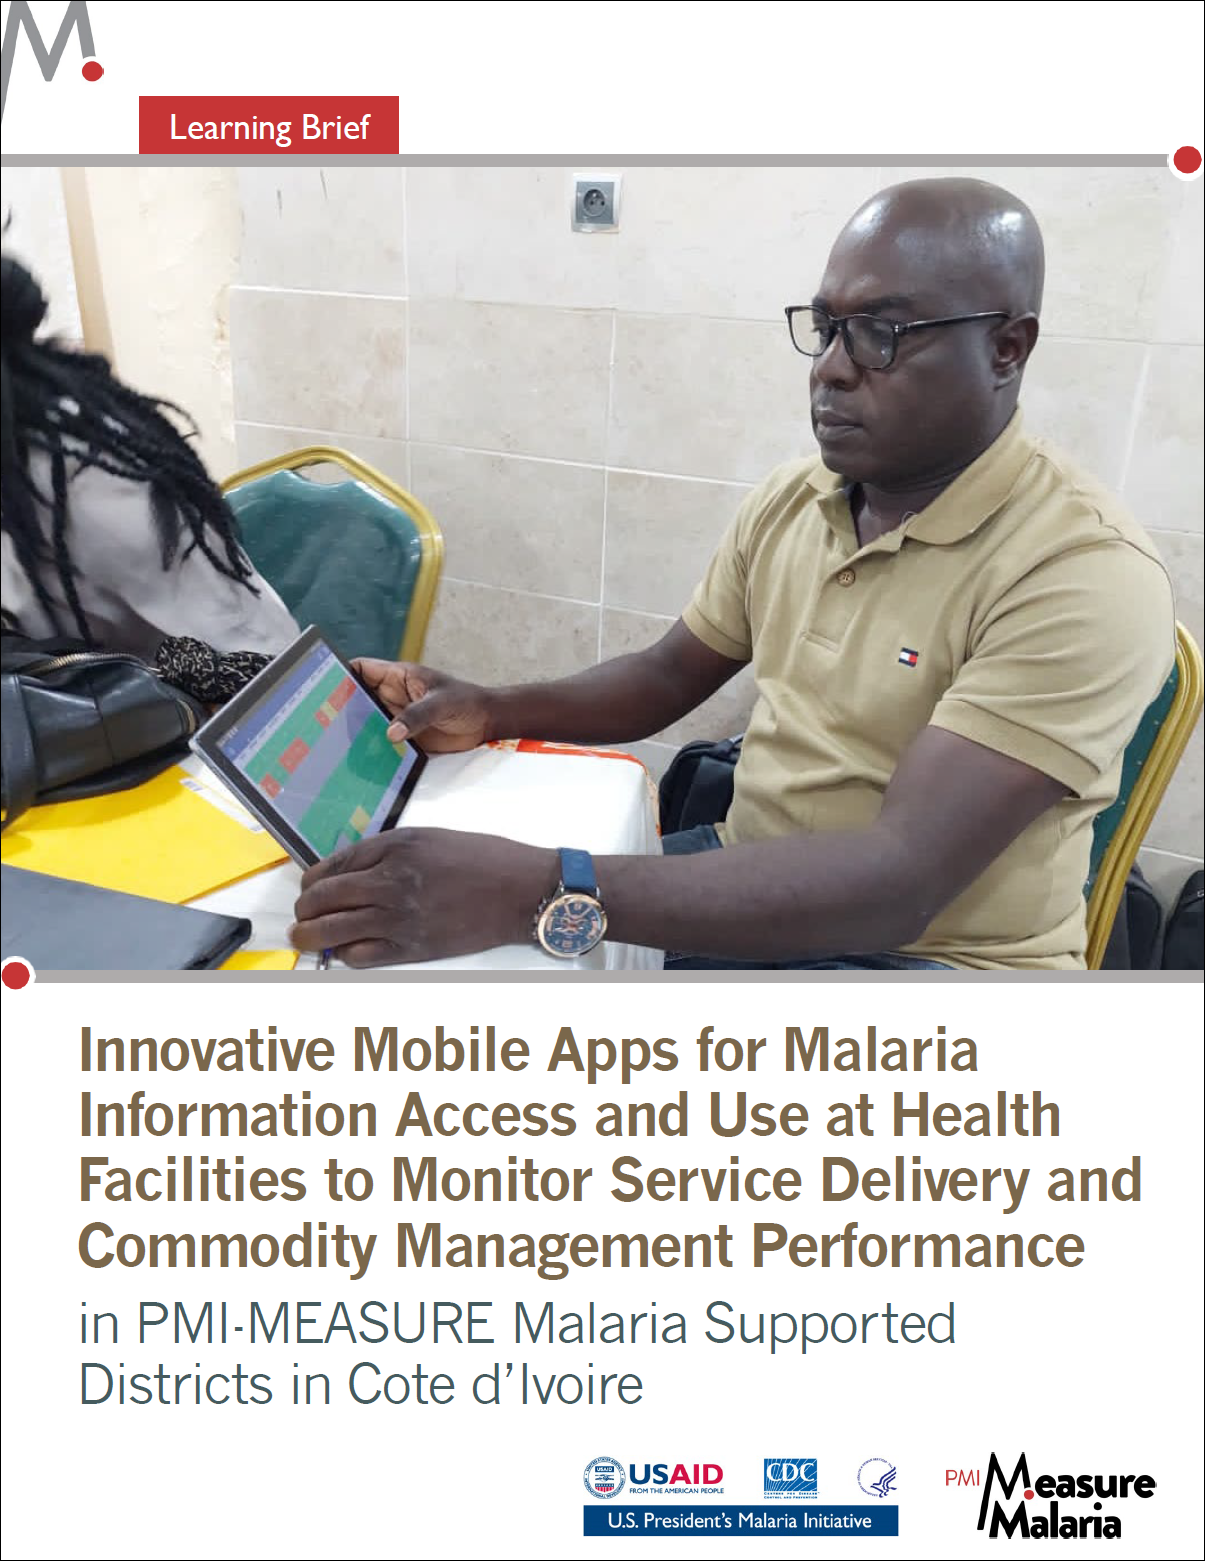 Innovative Mobile Apps for Malaria Information Access and Use at Health Facilities to Monitor Service Delivery and Commodity Management Performance in PMI Measure Malaria Supported Districts in Cote d’Ivoire